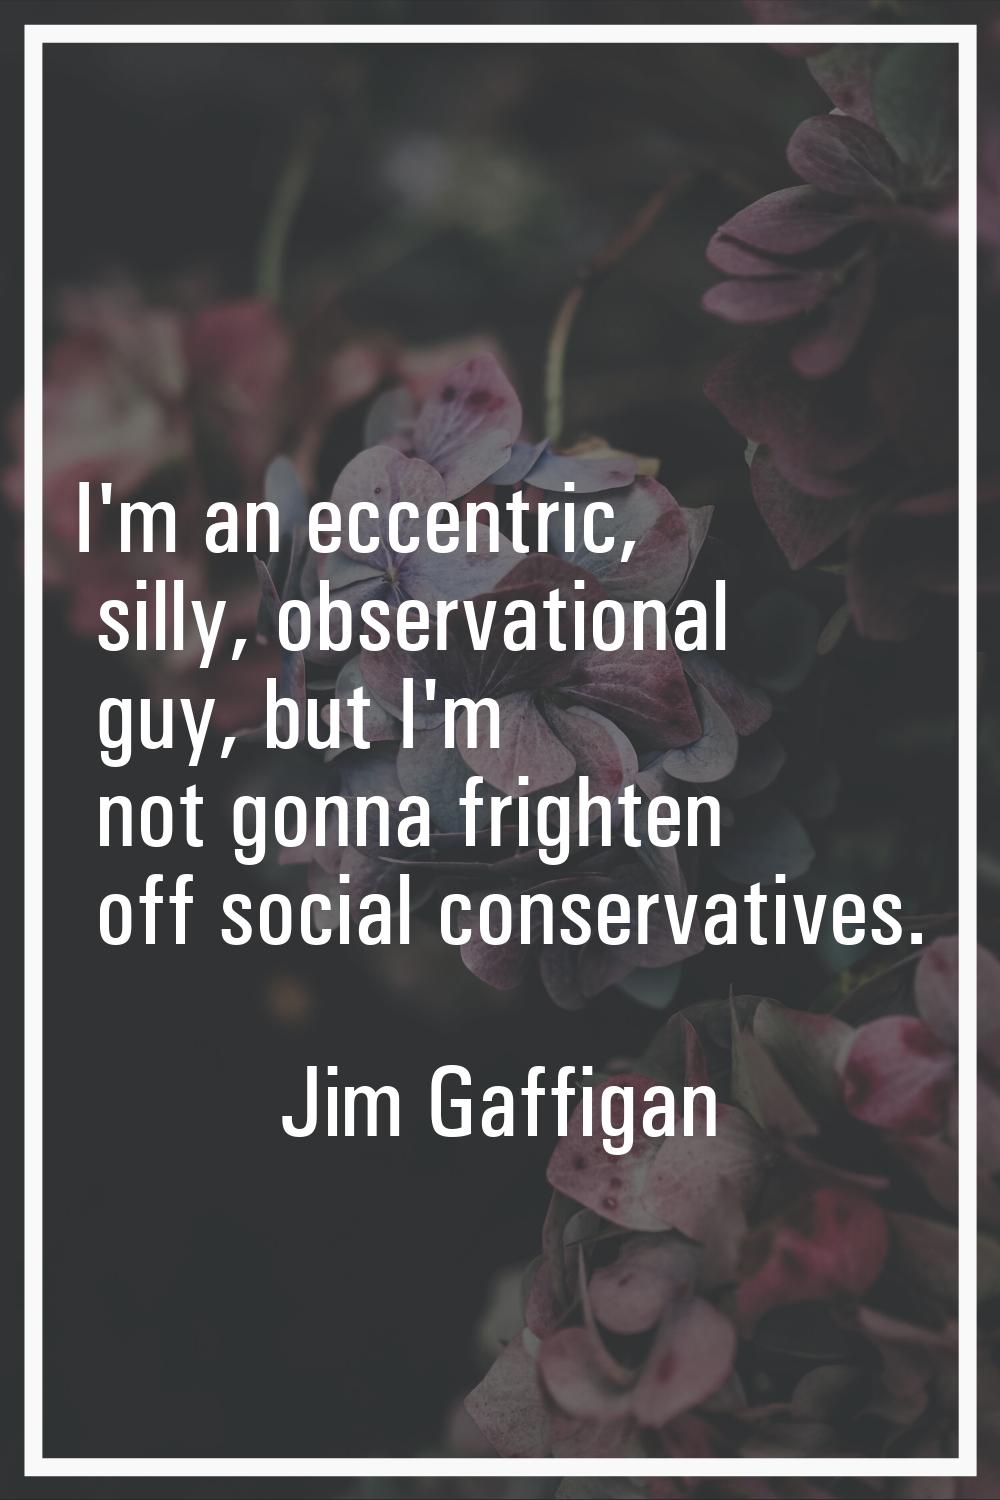 I'm an eccentric, silly, observational guy, but I'm not gonna frighten off social conservatives.